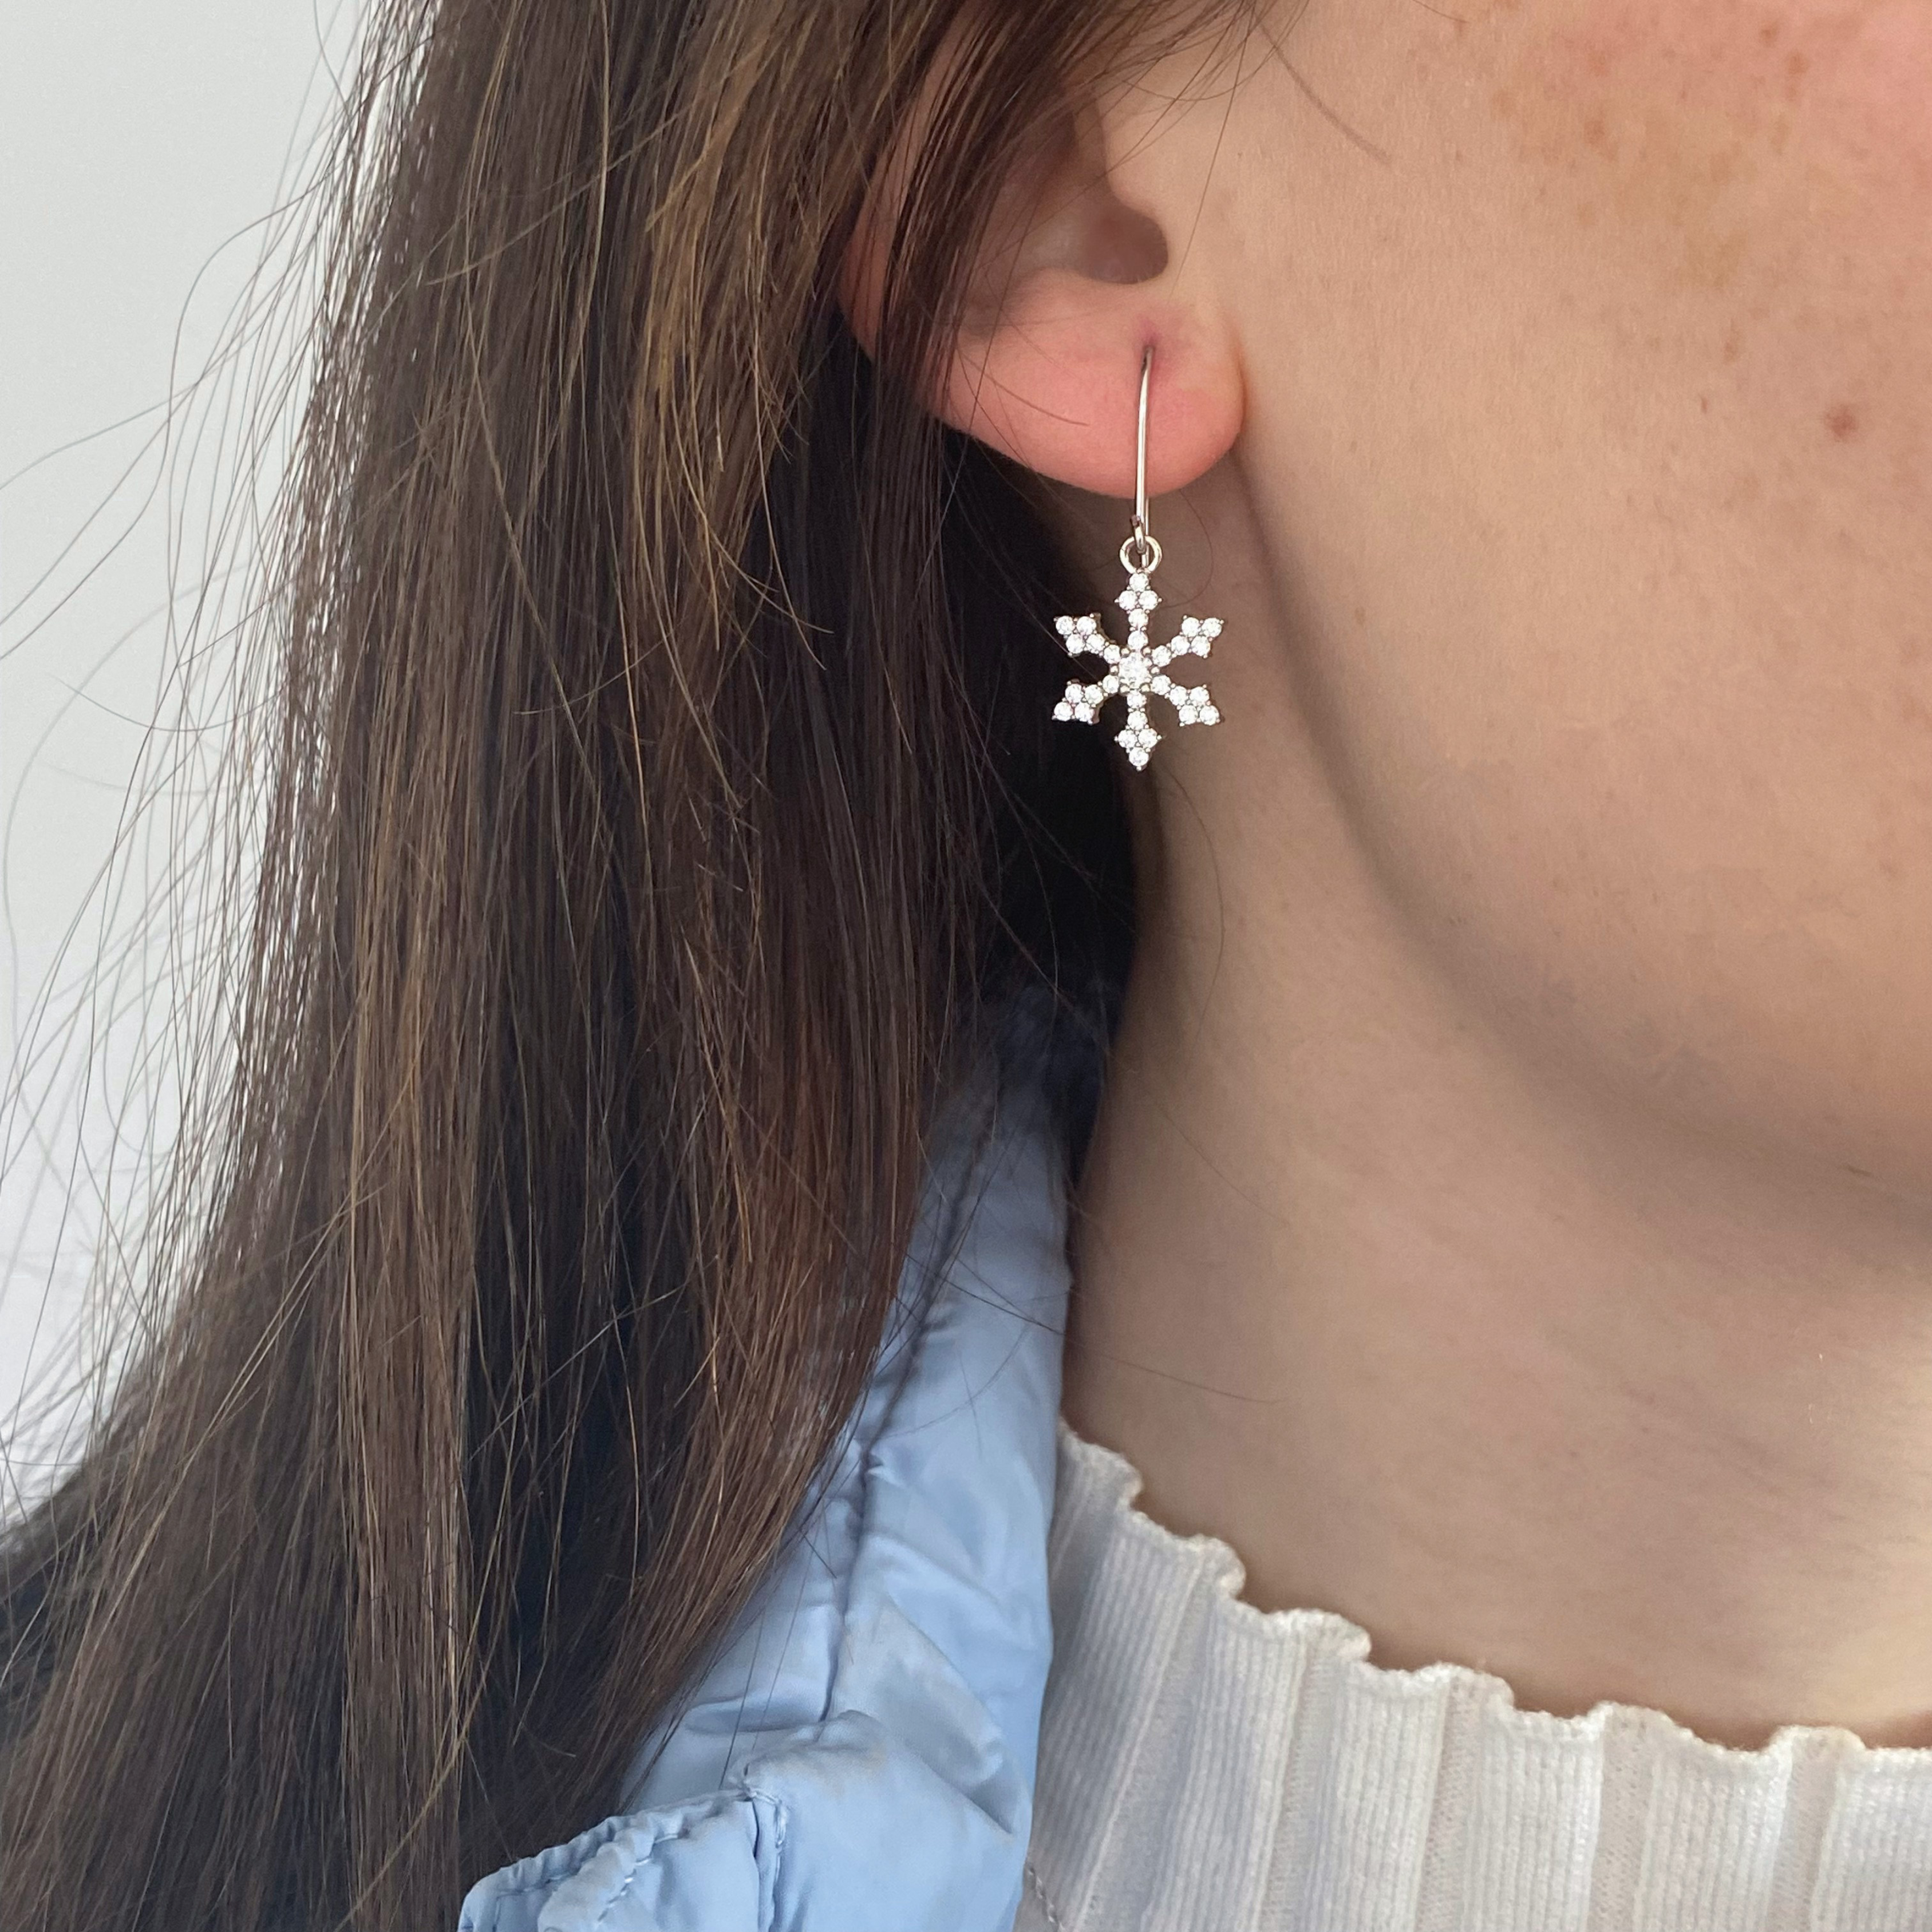 Olivia wearing the Shimmering Snowflake Earrings with Cubic Zirconia's